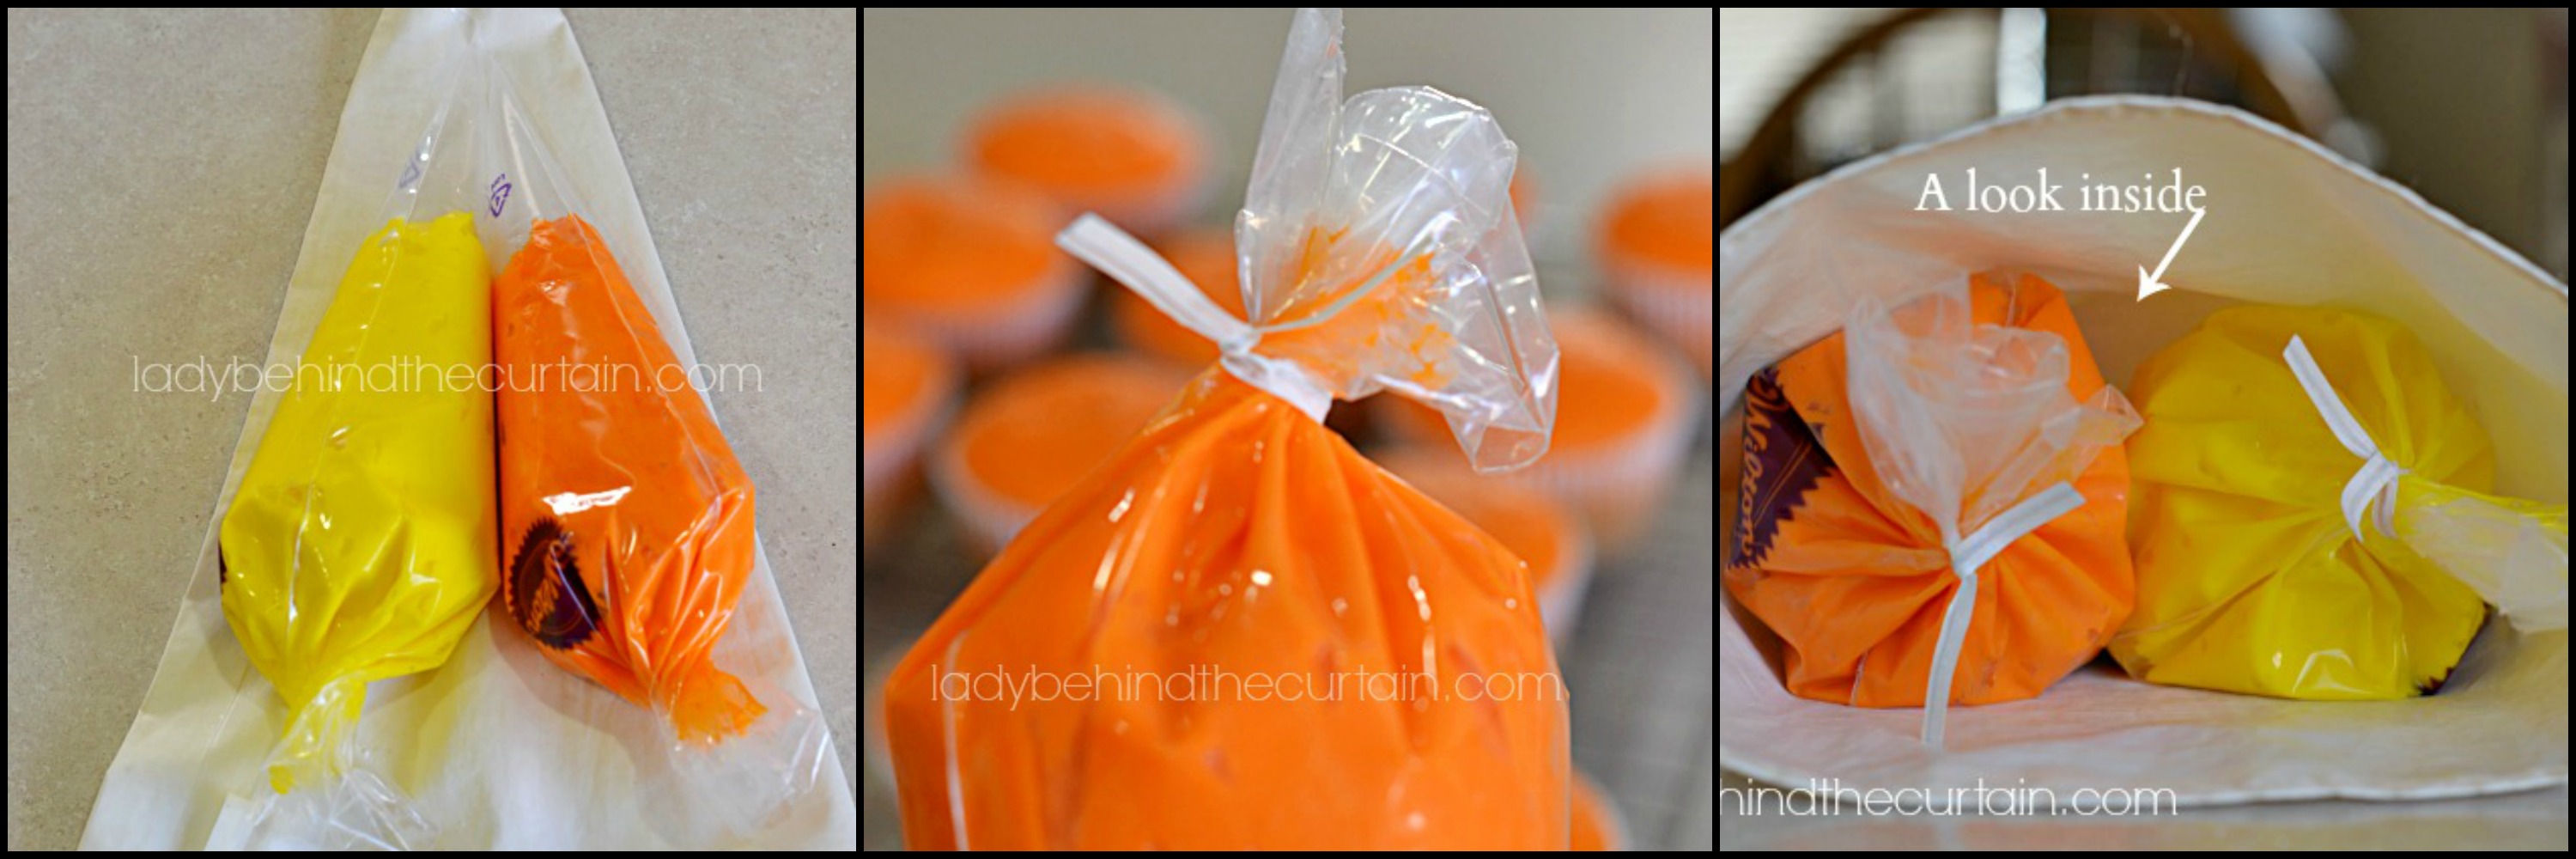 Sunset Cupcakes - Lady Behind The Curtain 